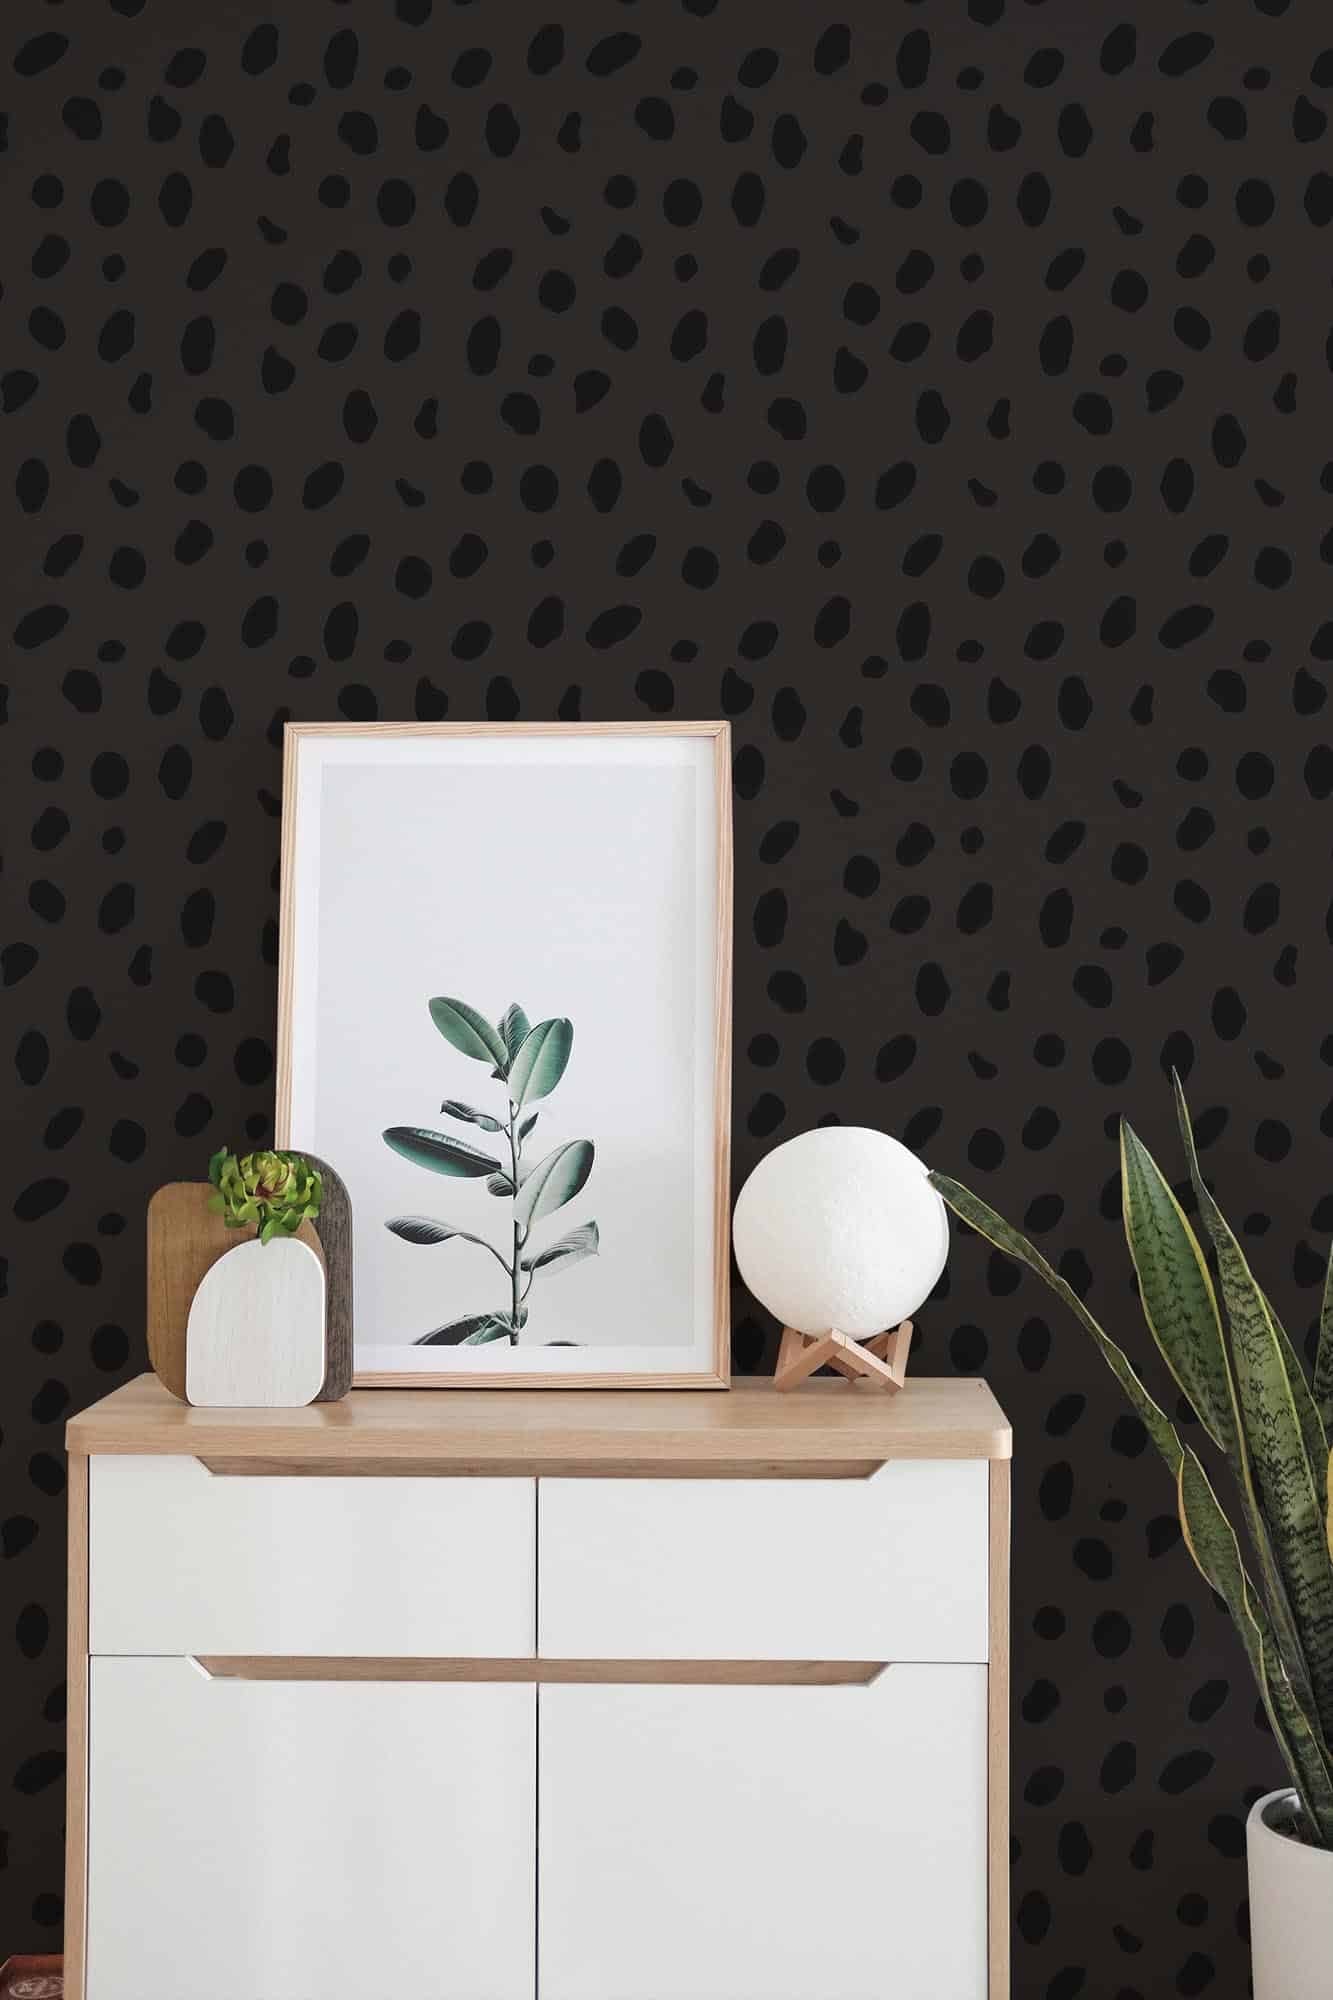 Chic Cheetah Print Wallpaper for Camper or Home - Black Peel and Stick or Traditional Wallpaper